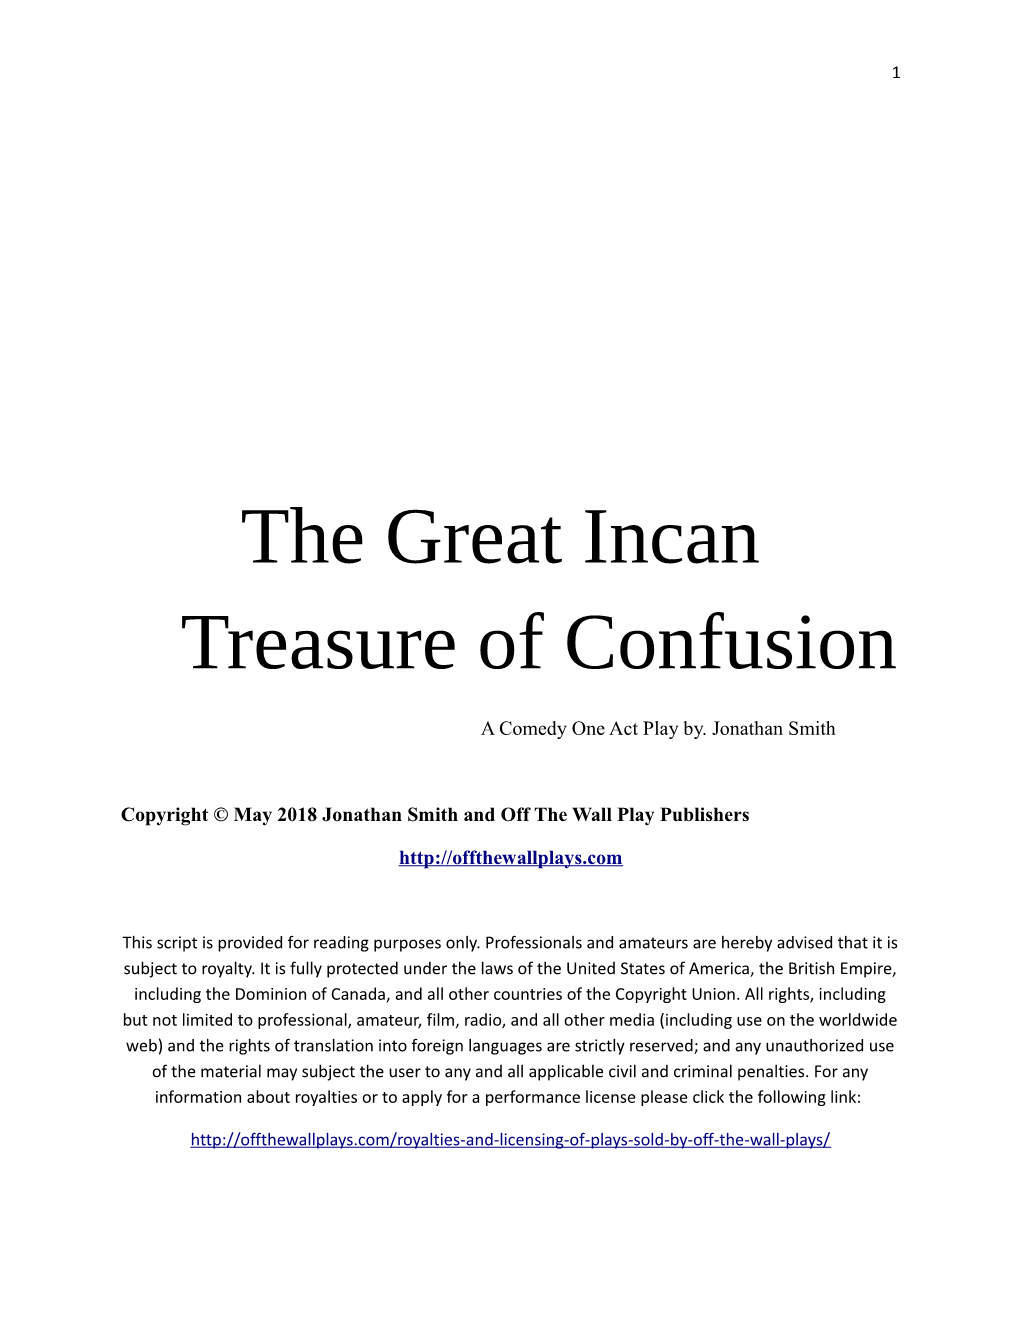 The Great Incan Treasure of Confusion